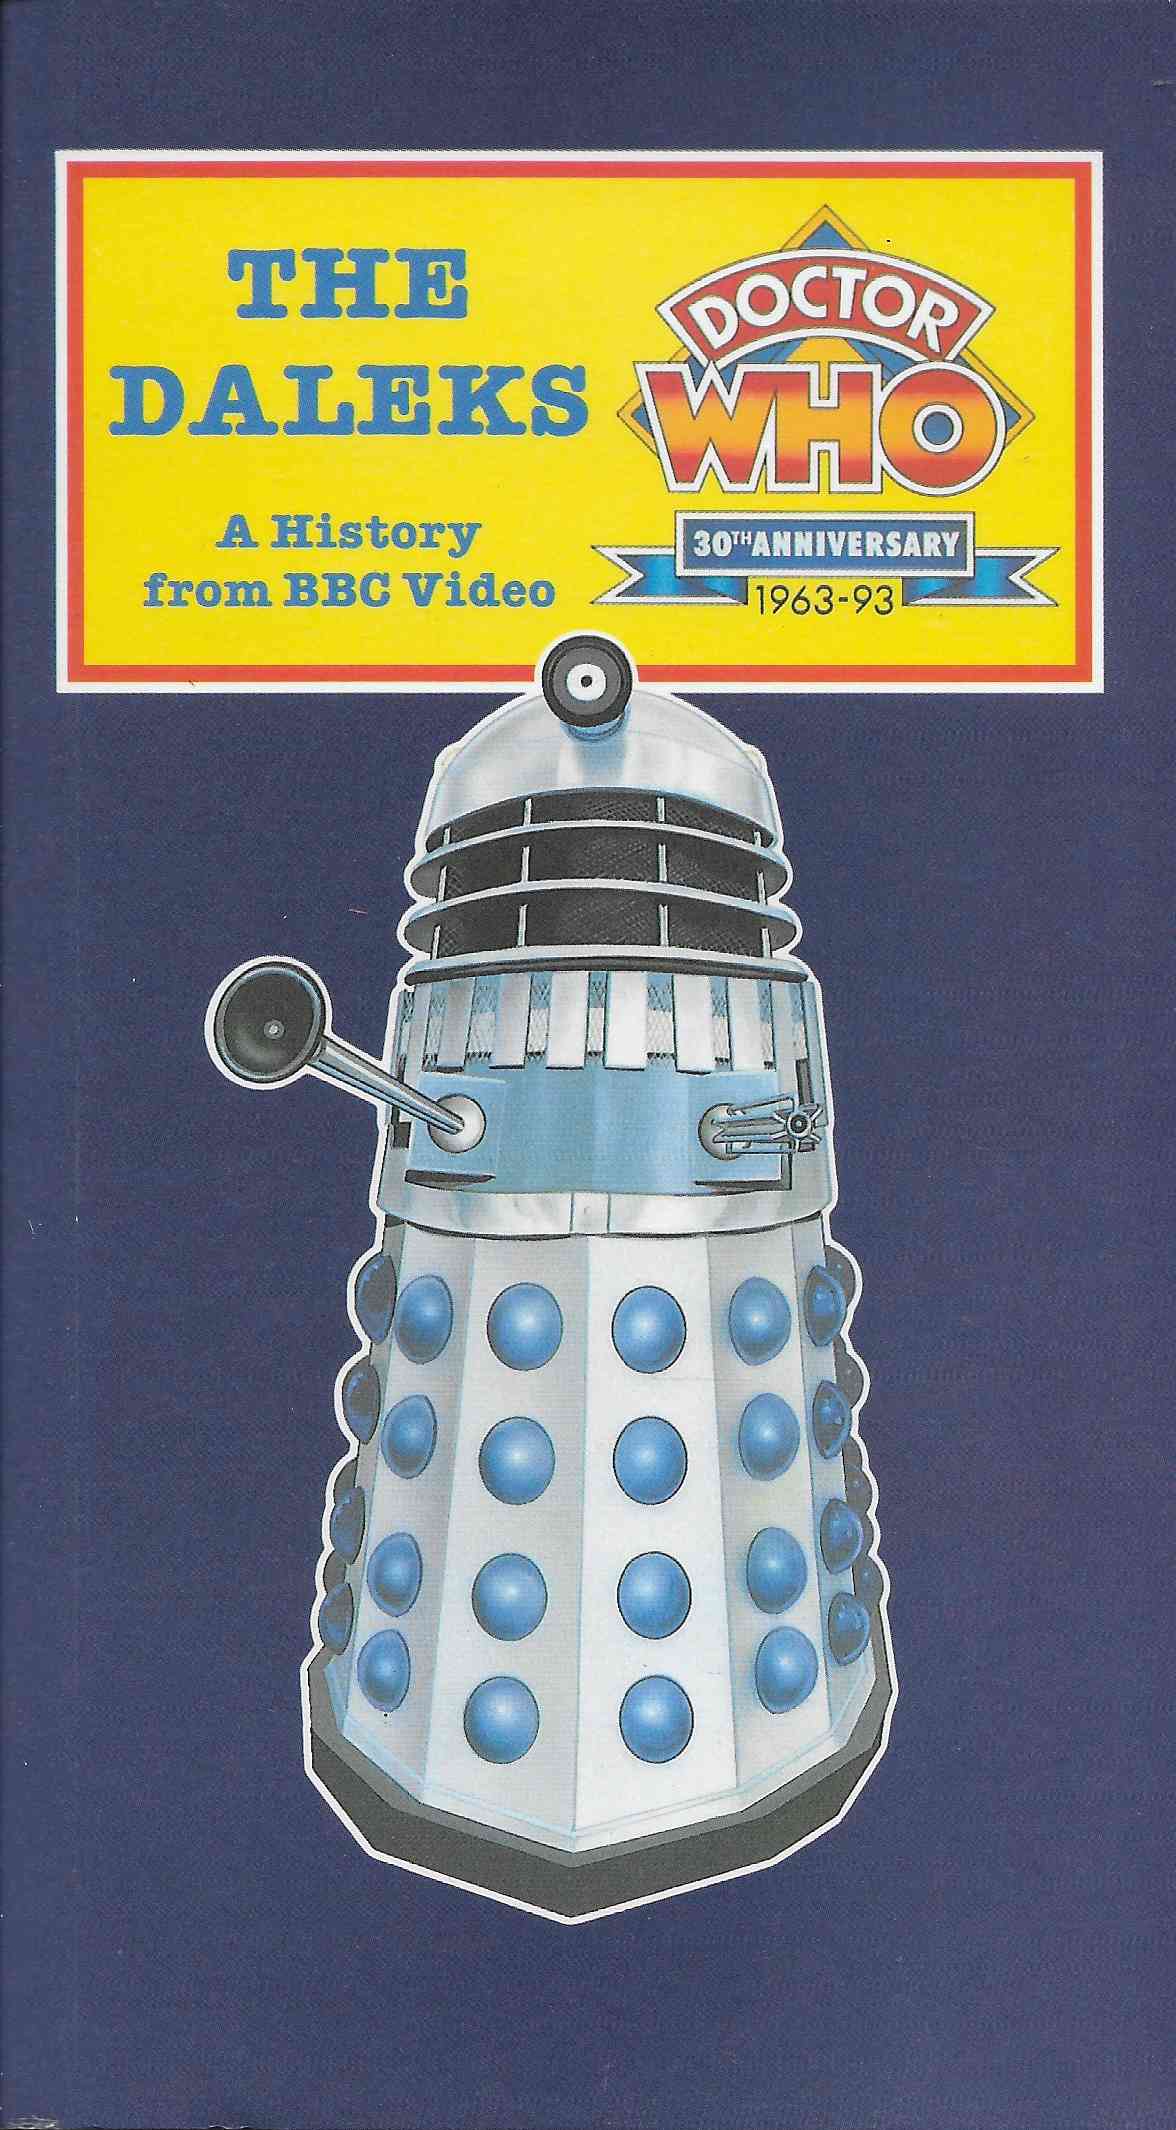 Picture of The Daleks - A history from BBC Video by artist Andrew Pixley / Michael McManus from the BBC books - Records and Tapes library